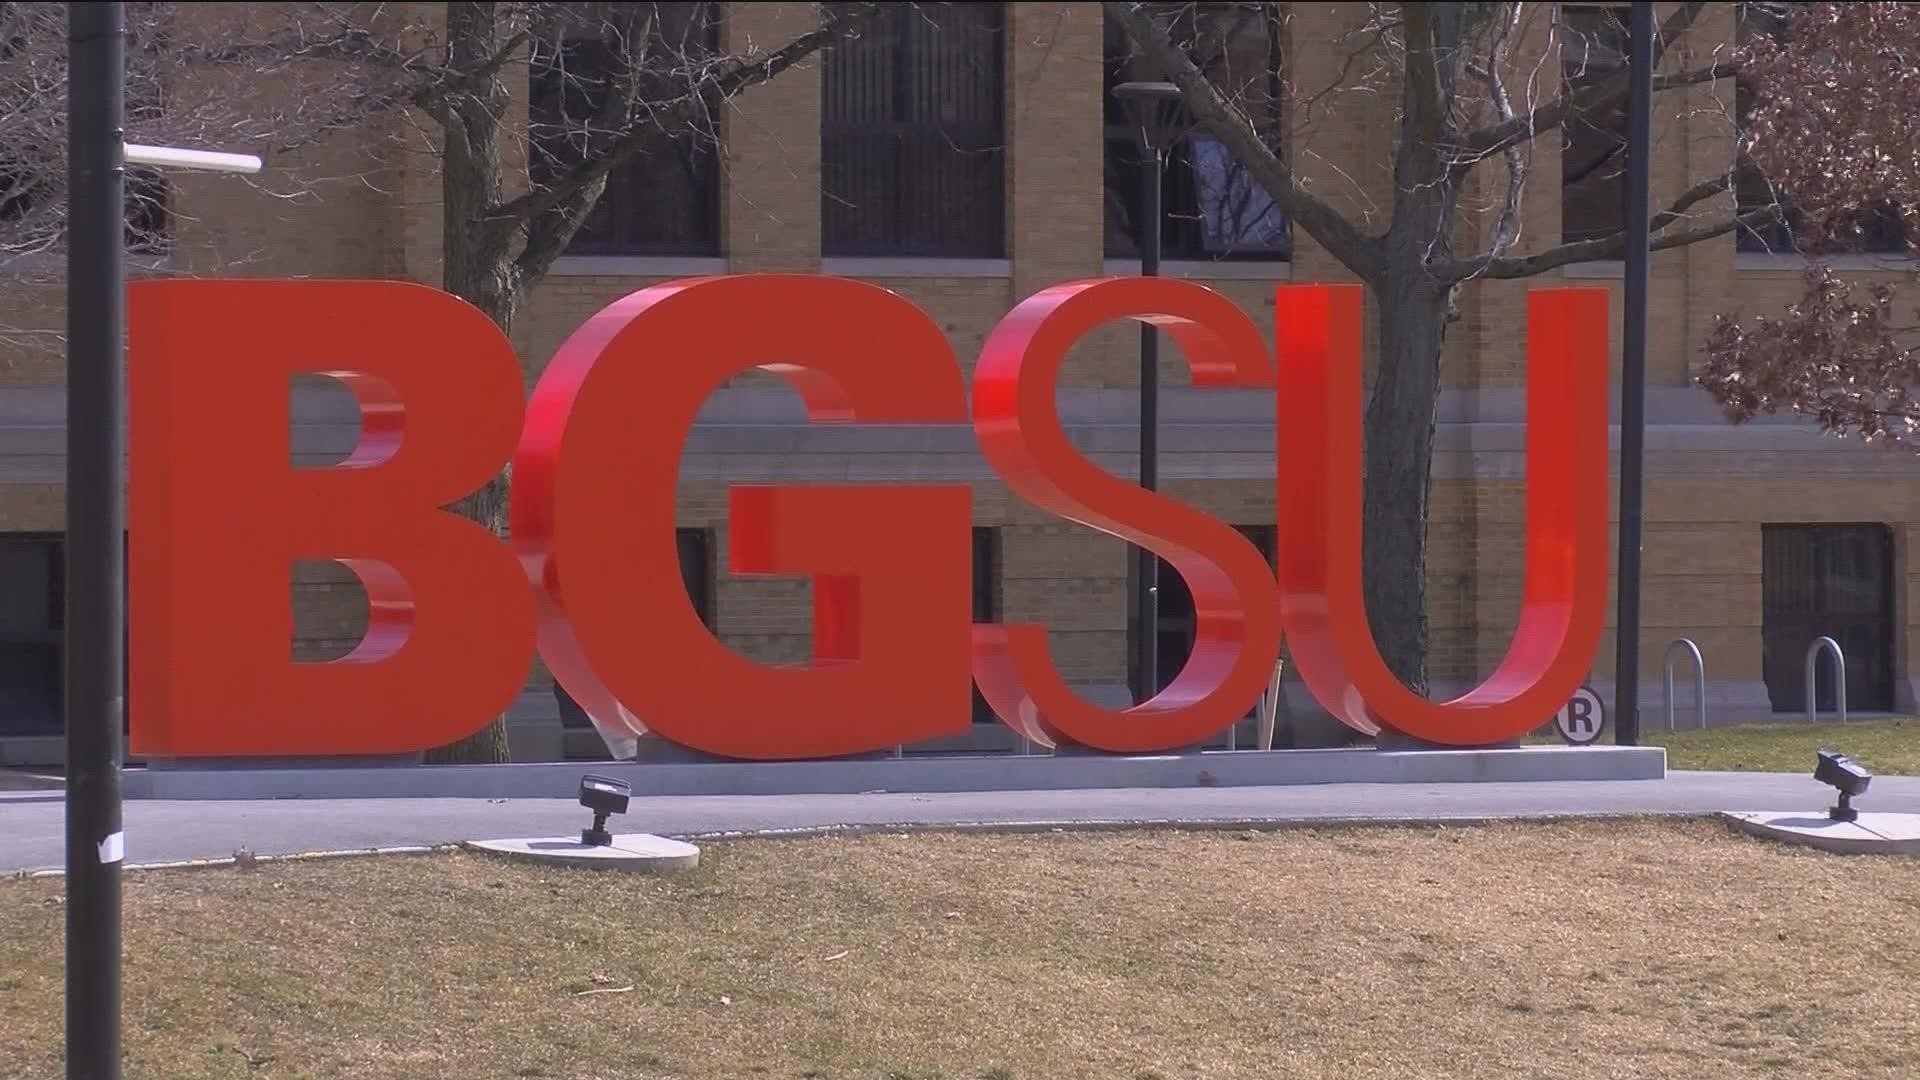 BGSU will host the event for nearly 200 educators and work to prevent hazing at all educational levels.